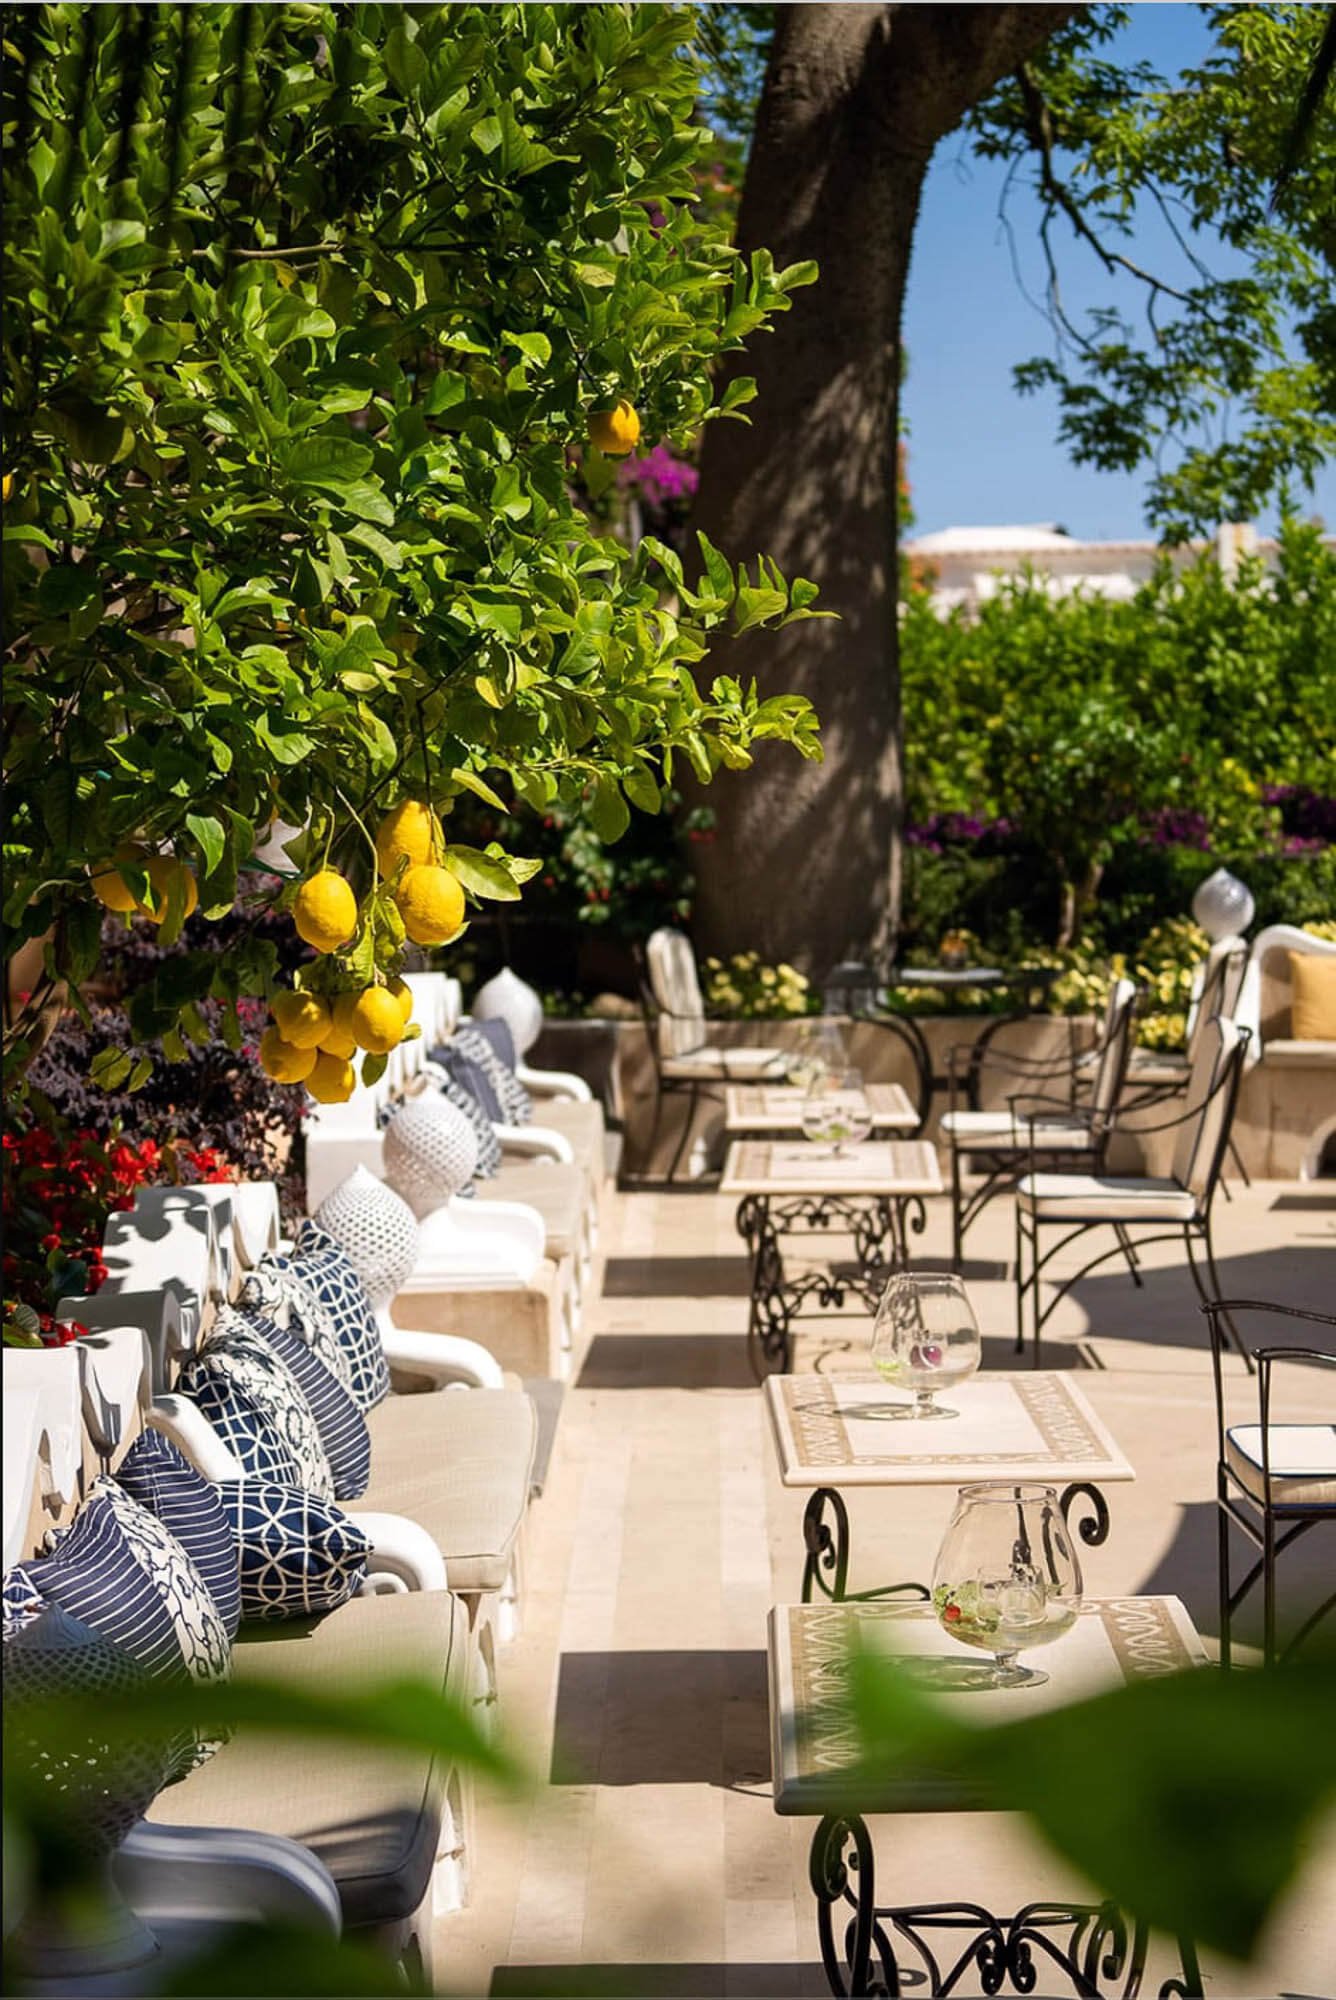 Le Petit Murat in Positano is located in a magical courtyard. It provides phenomenal views of town and of the Positano church dome.